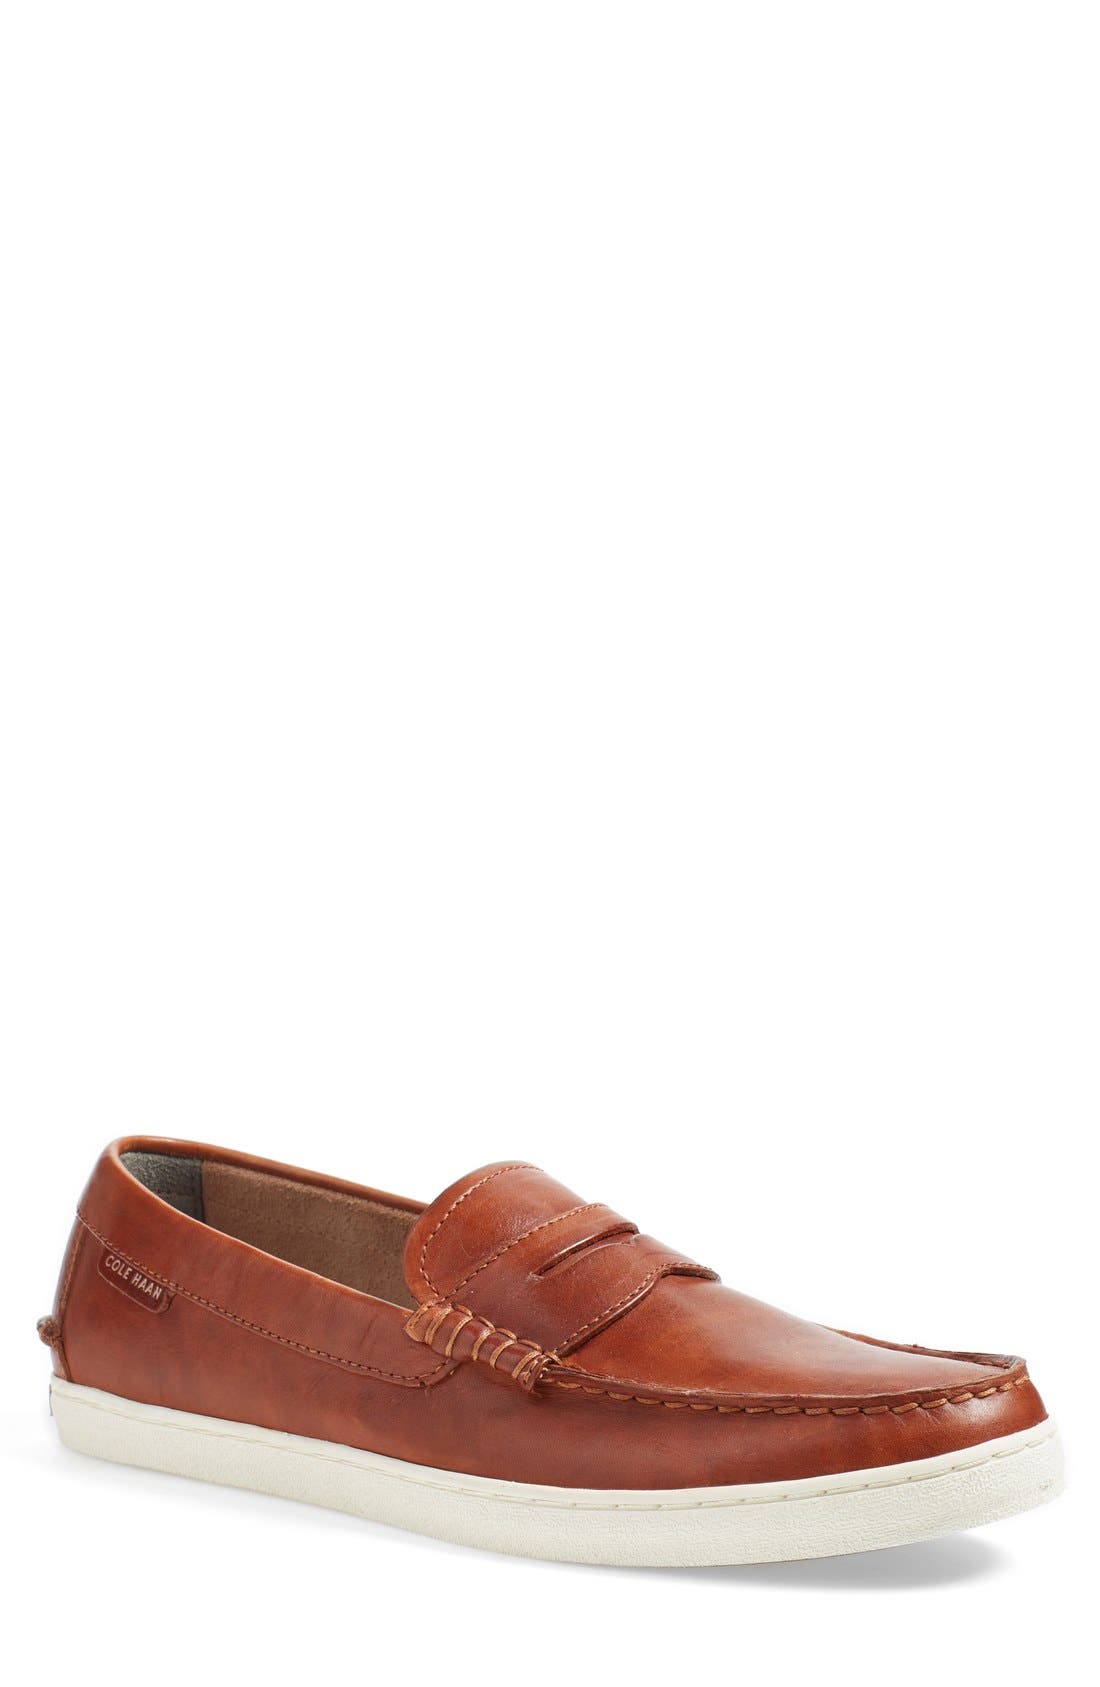 nordstrom cole haan mens shoes